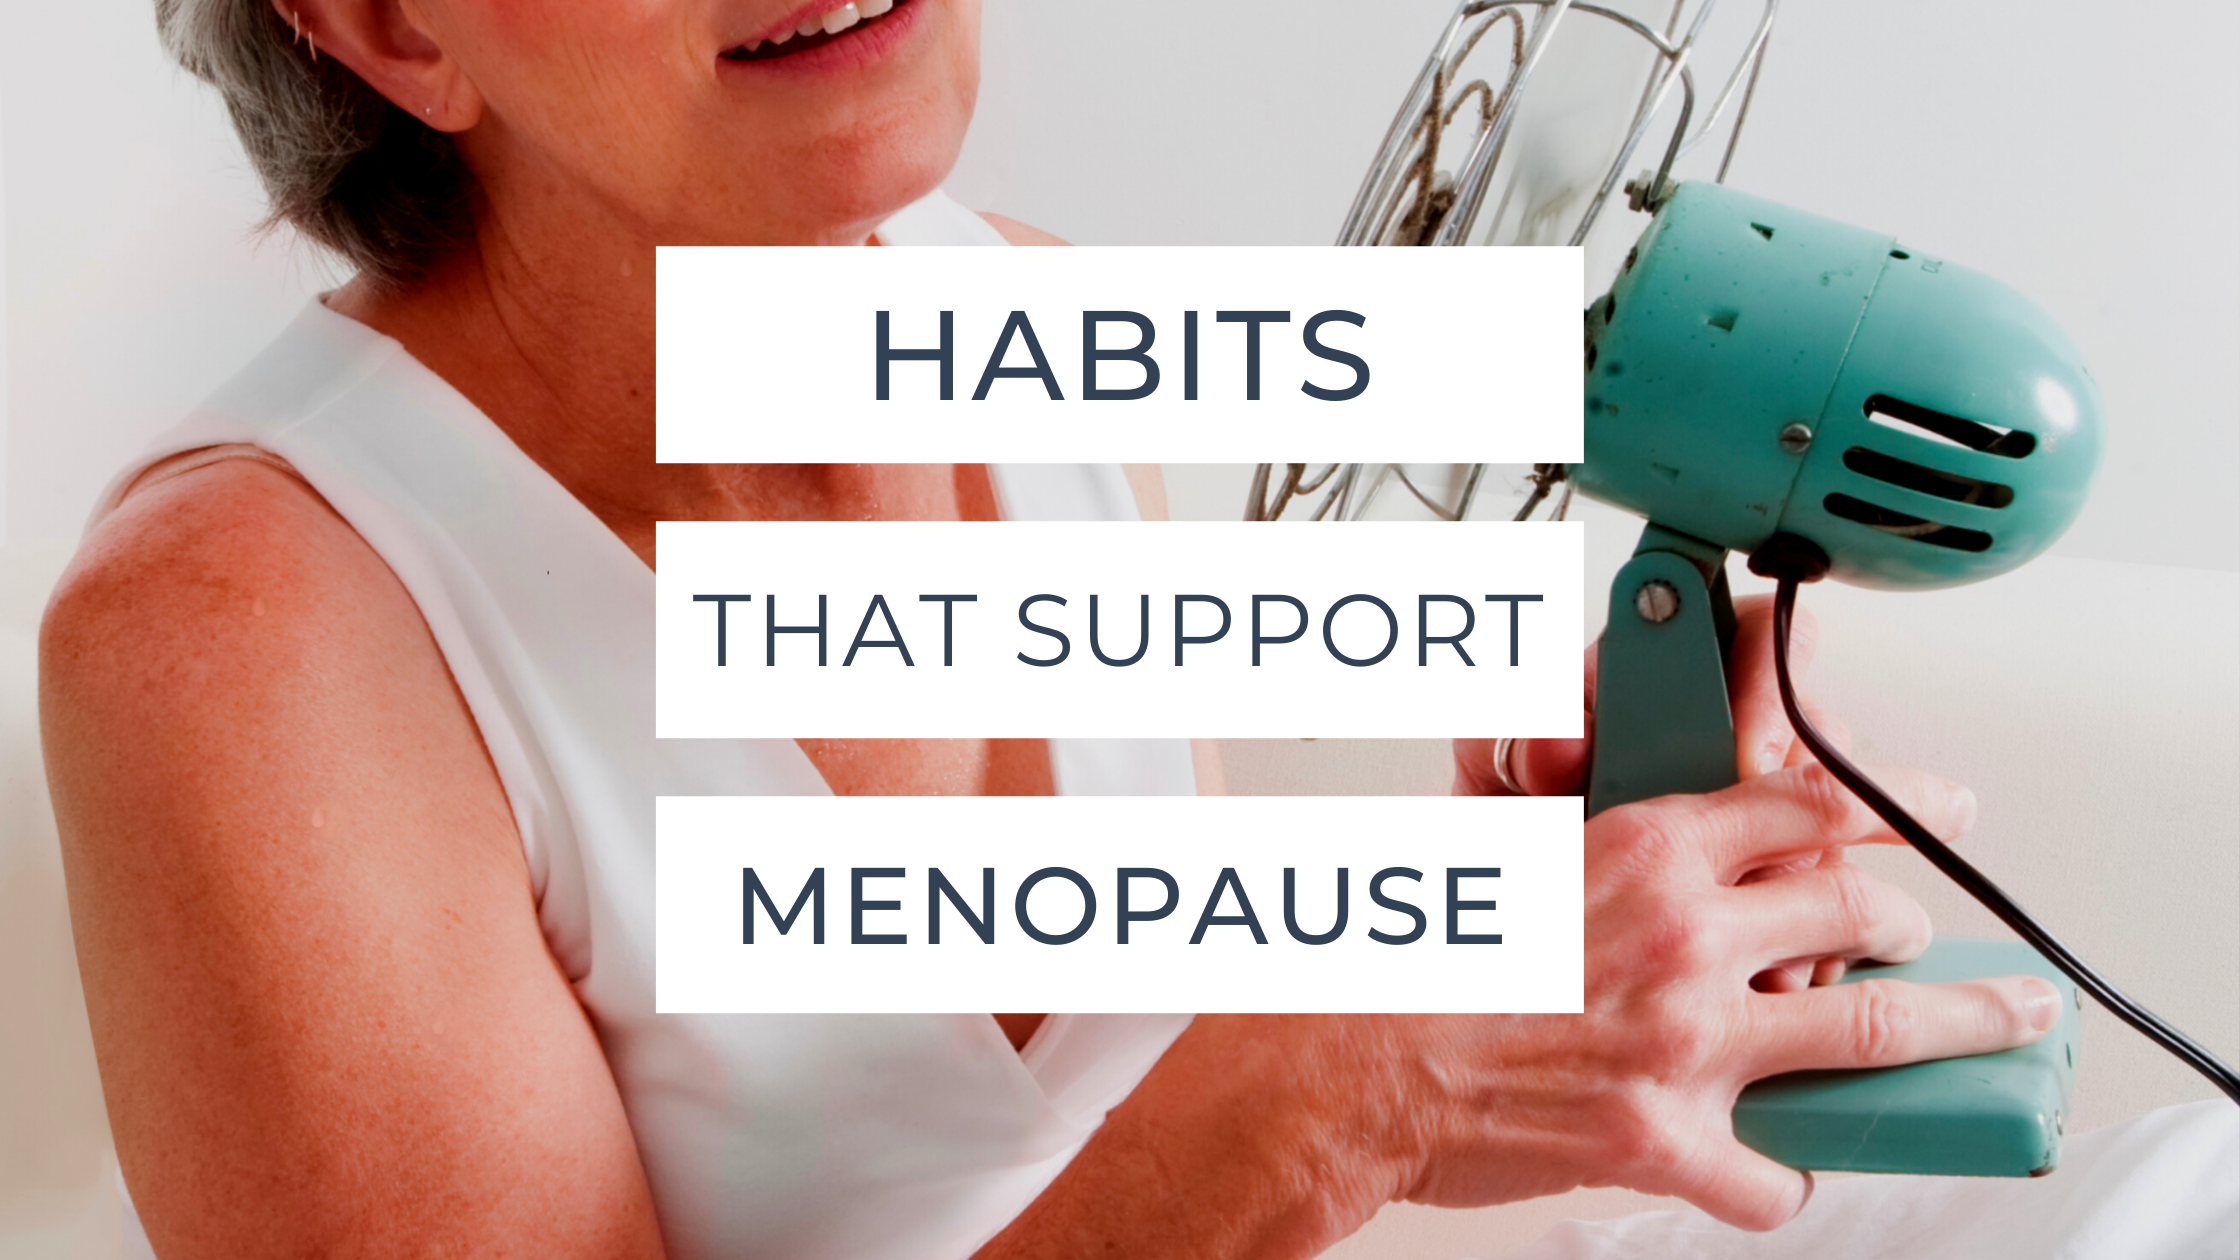 Habits that support menopause